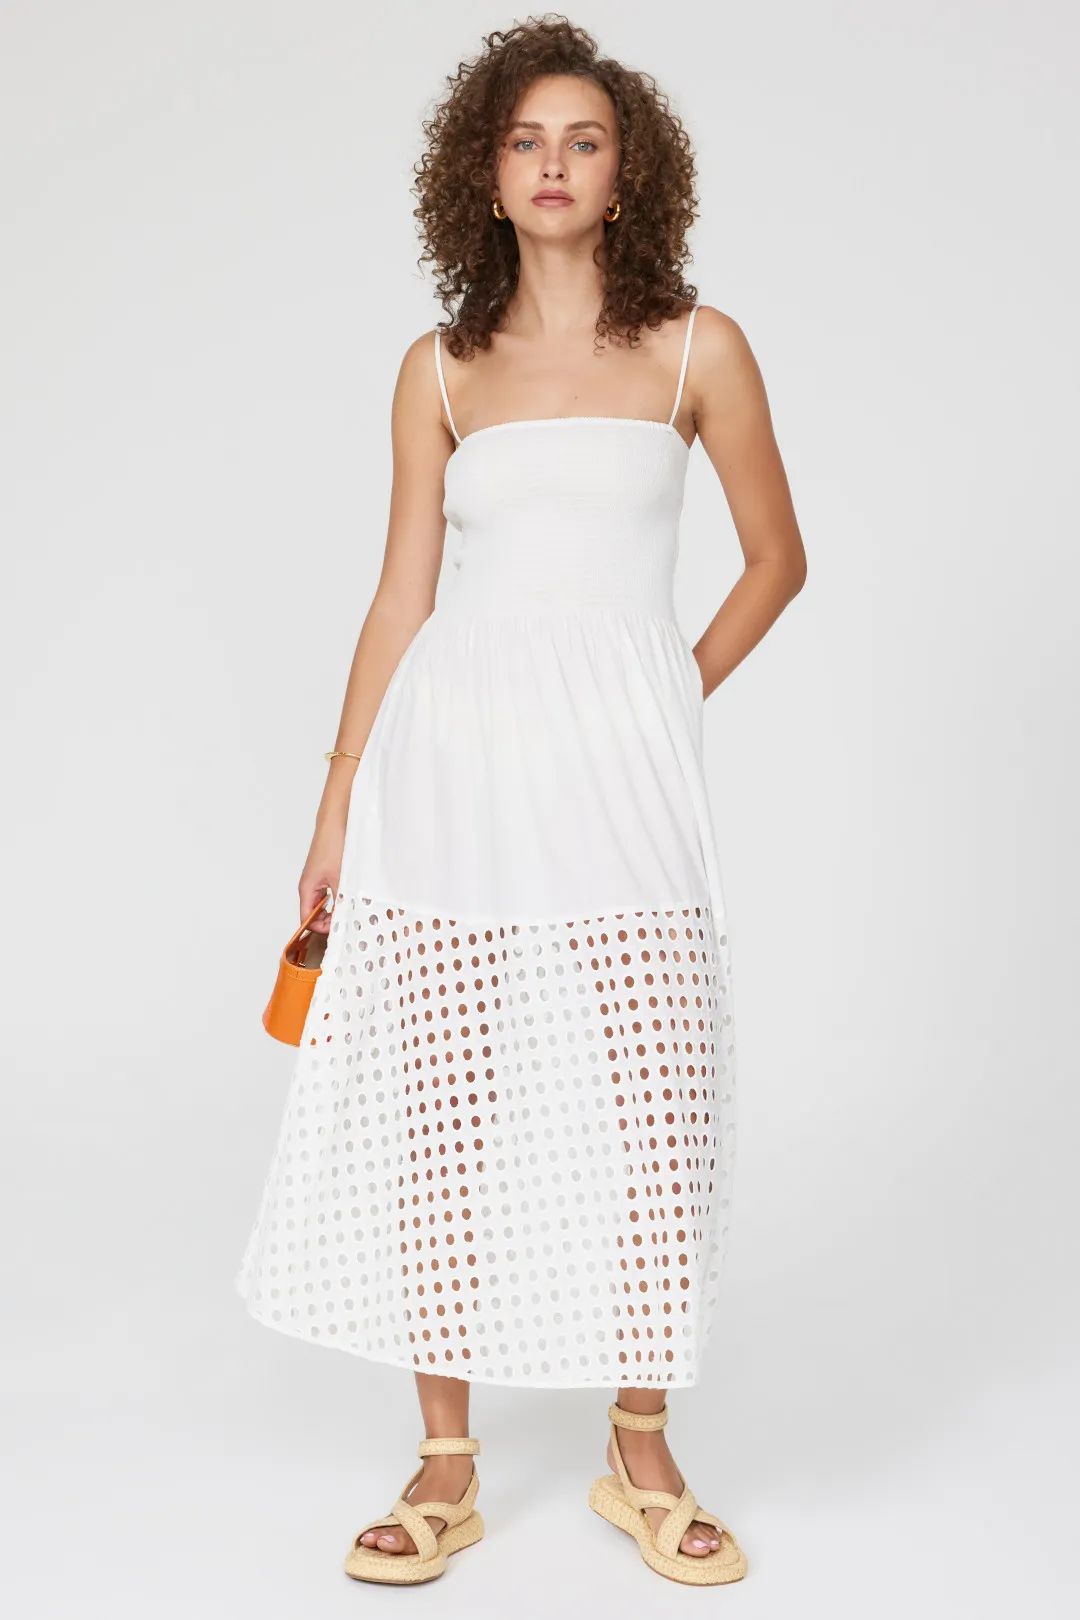 White Kennedy Dress | Rent the Runway